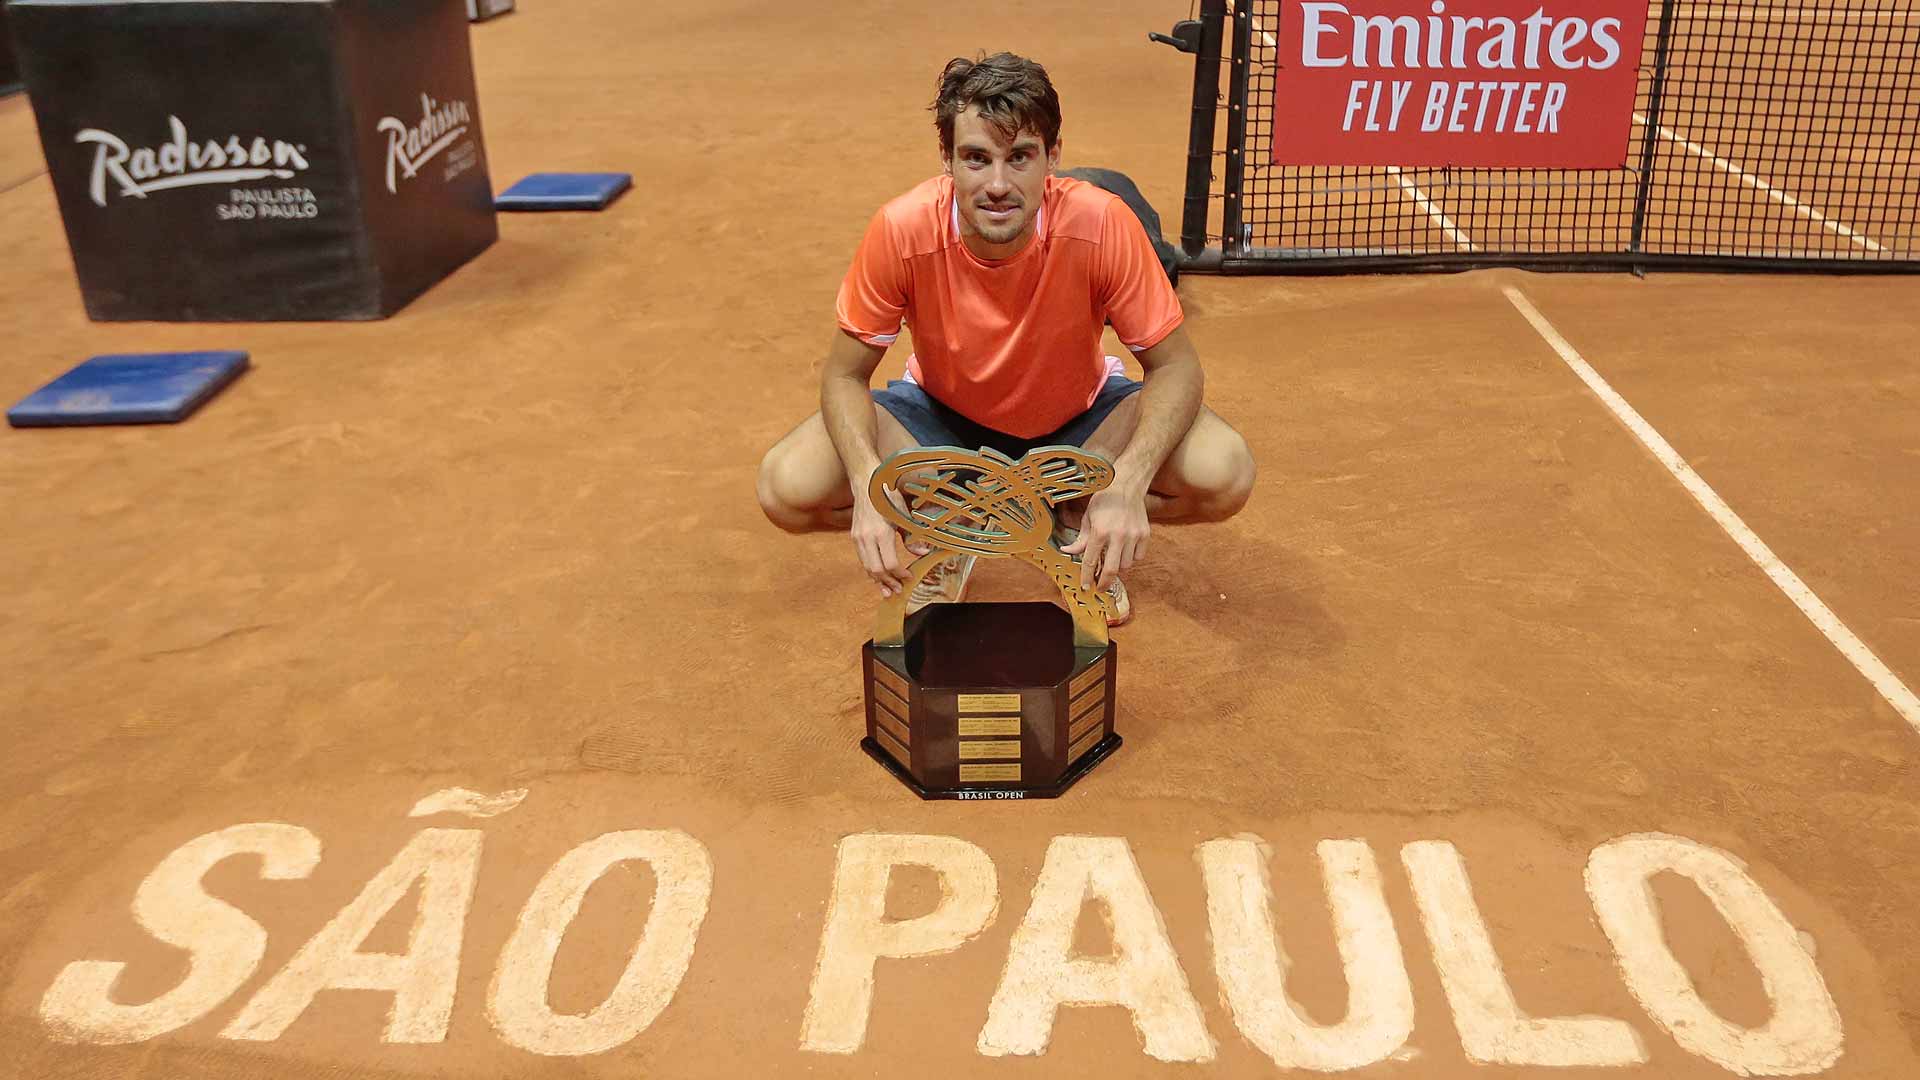 Guido Pella poses with his first ATP Tour trophy in Sao Paulo